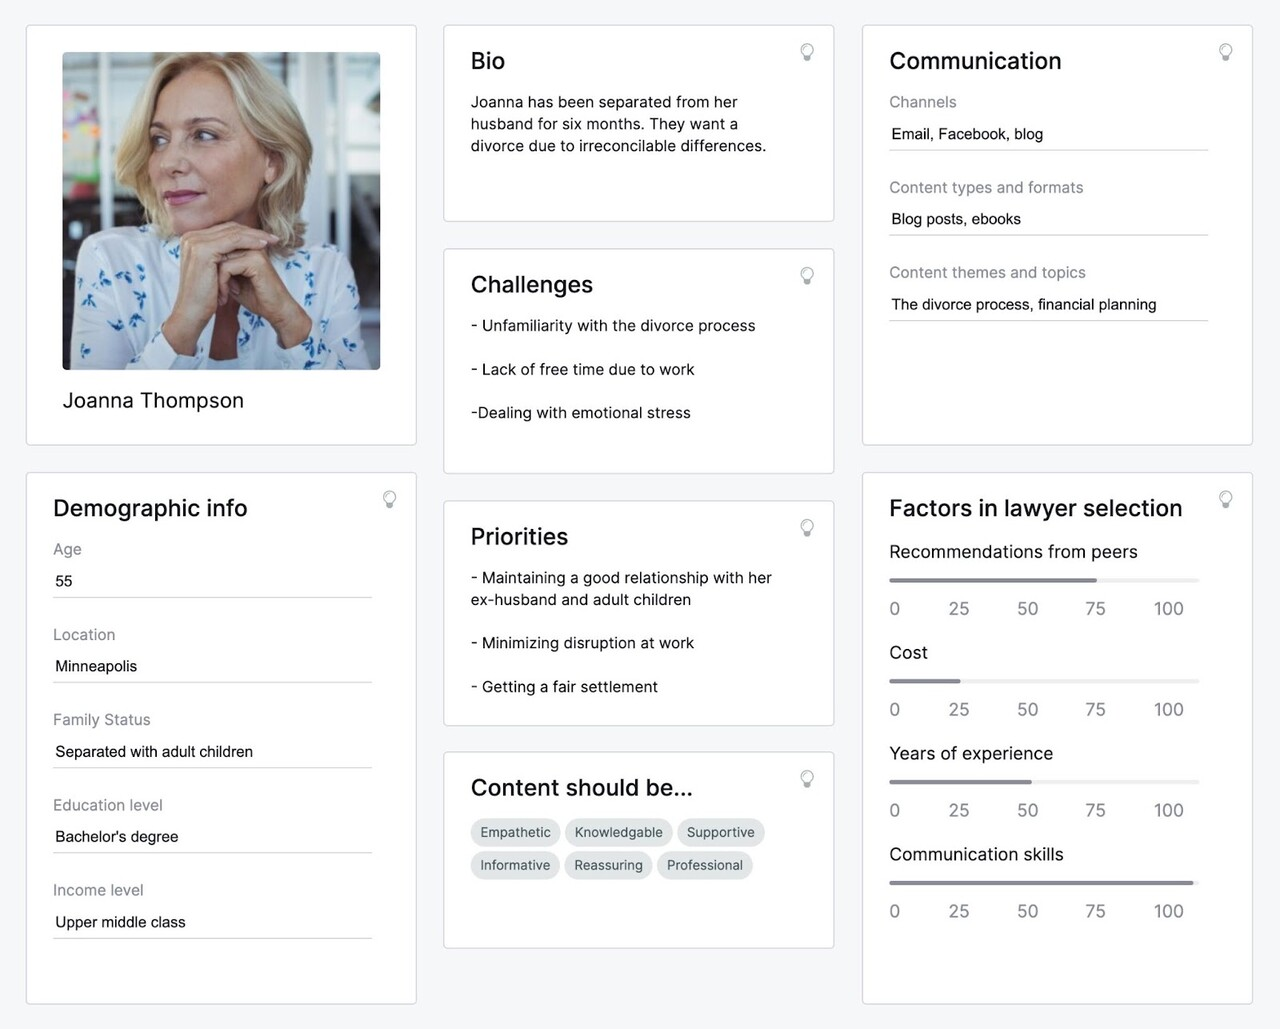 Customer profile of a woman, with a portrait and various text sections outlining her demographic info, bio, challenges, etc.